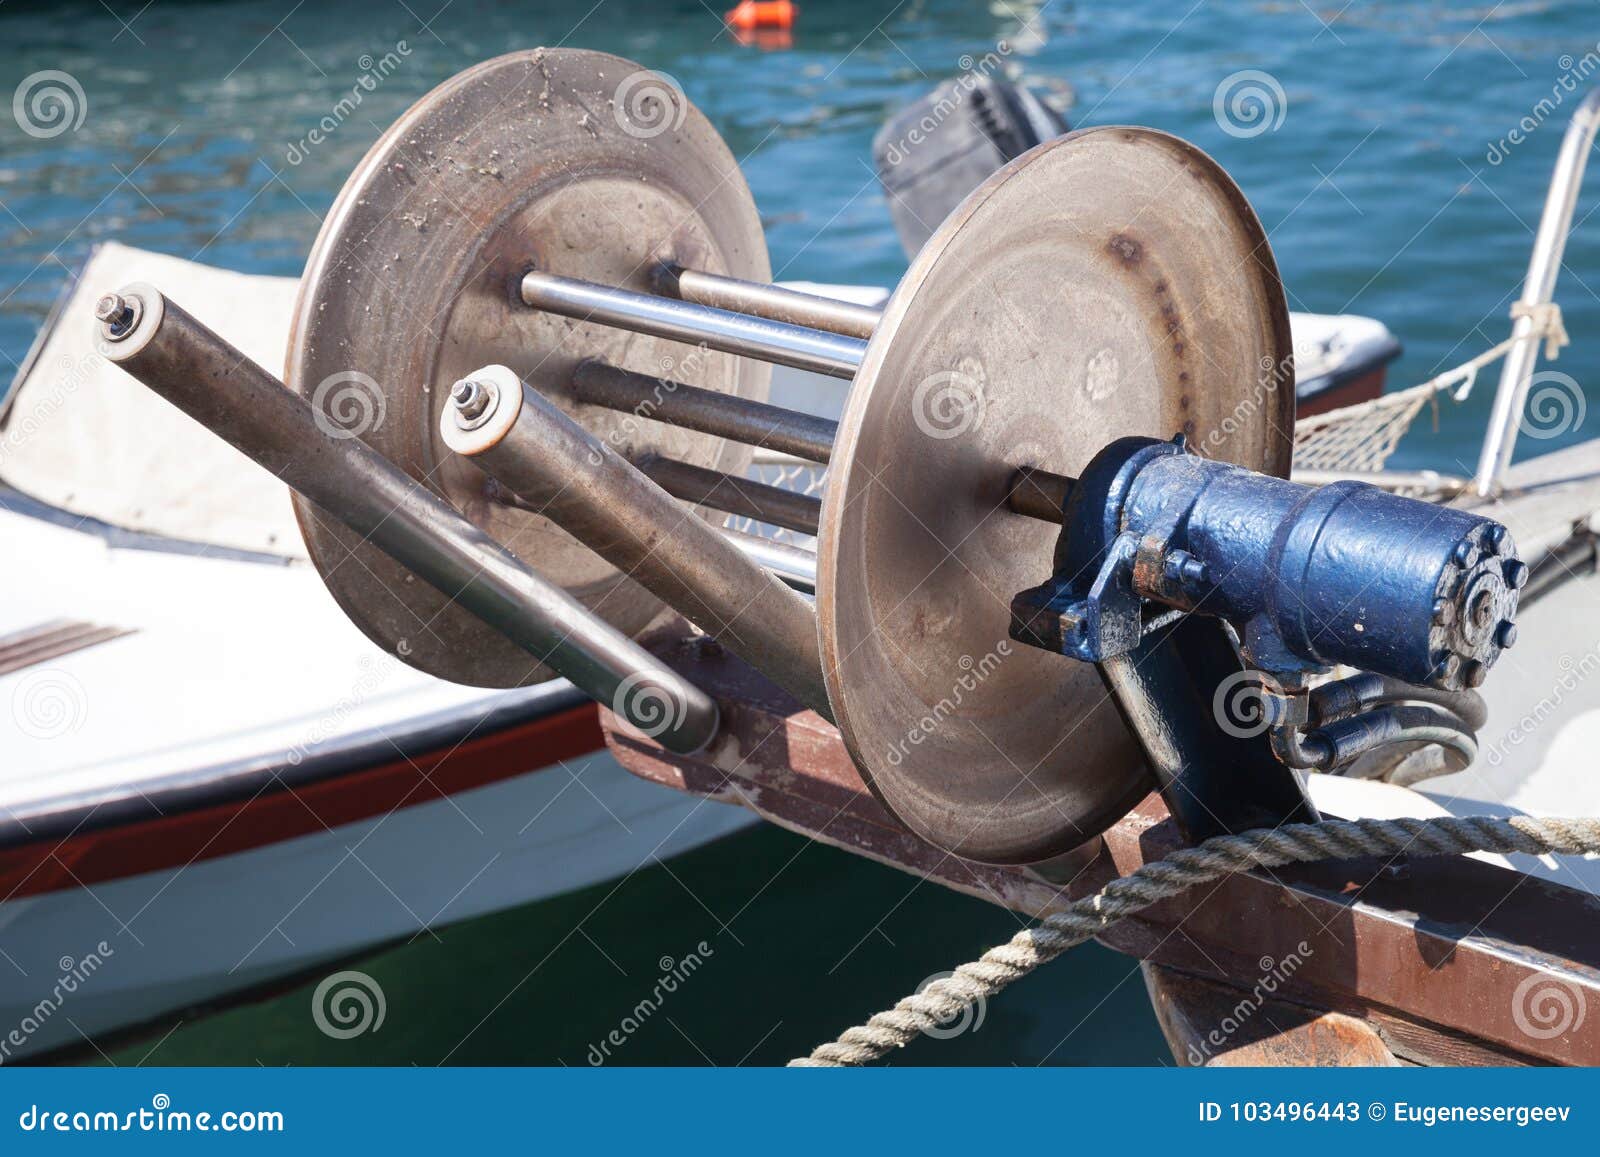 Bow Winch for Fishing Net, Small Boat Part Stock Image - Image of fishery,  nautical: 103496443